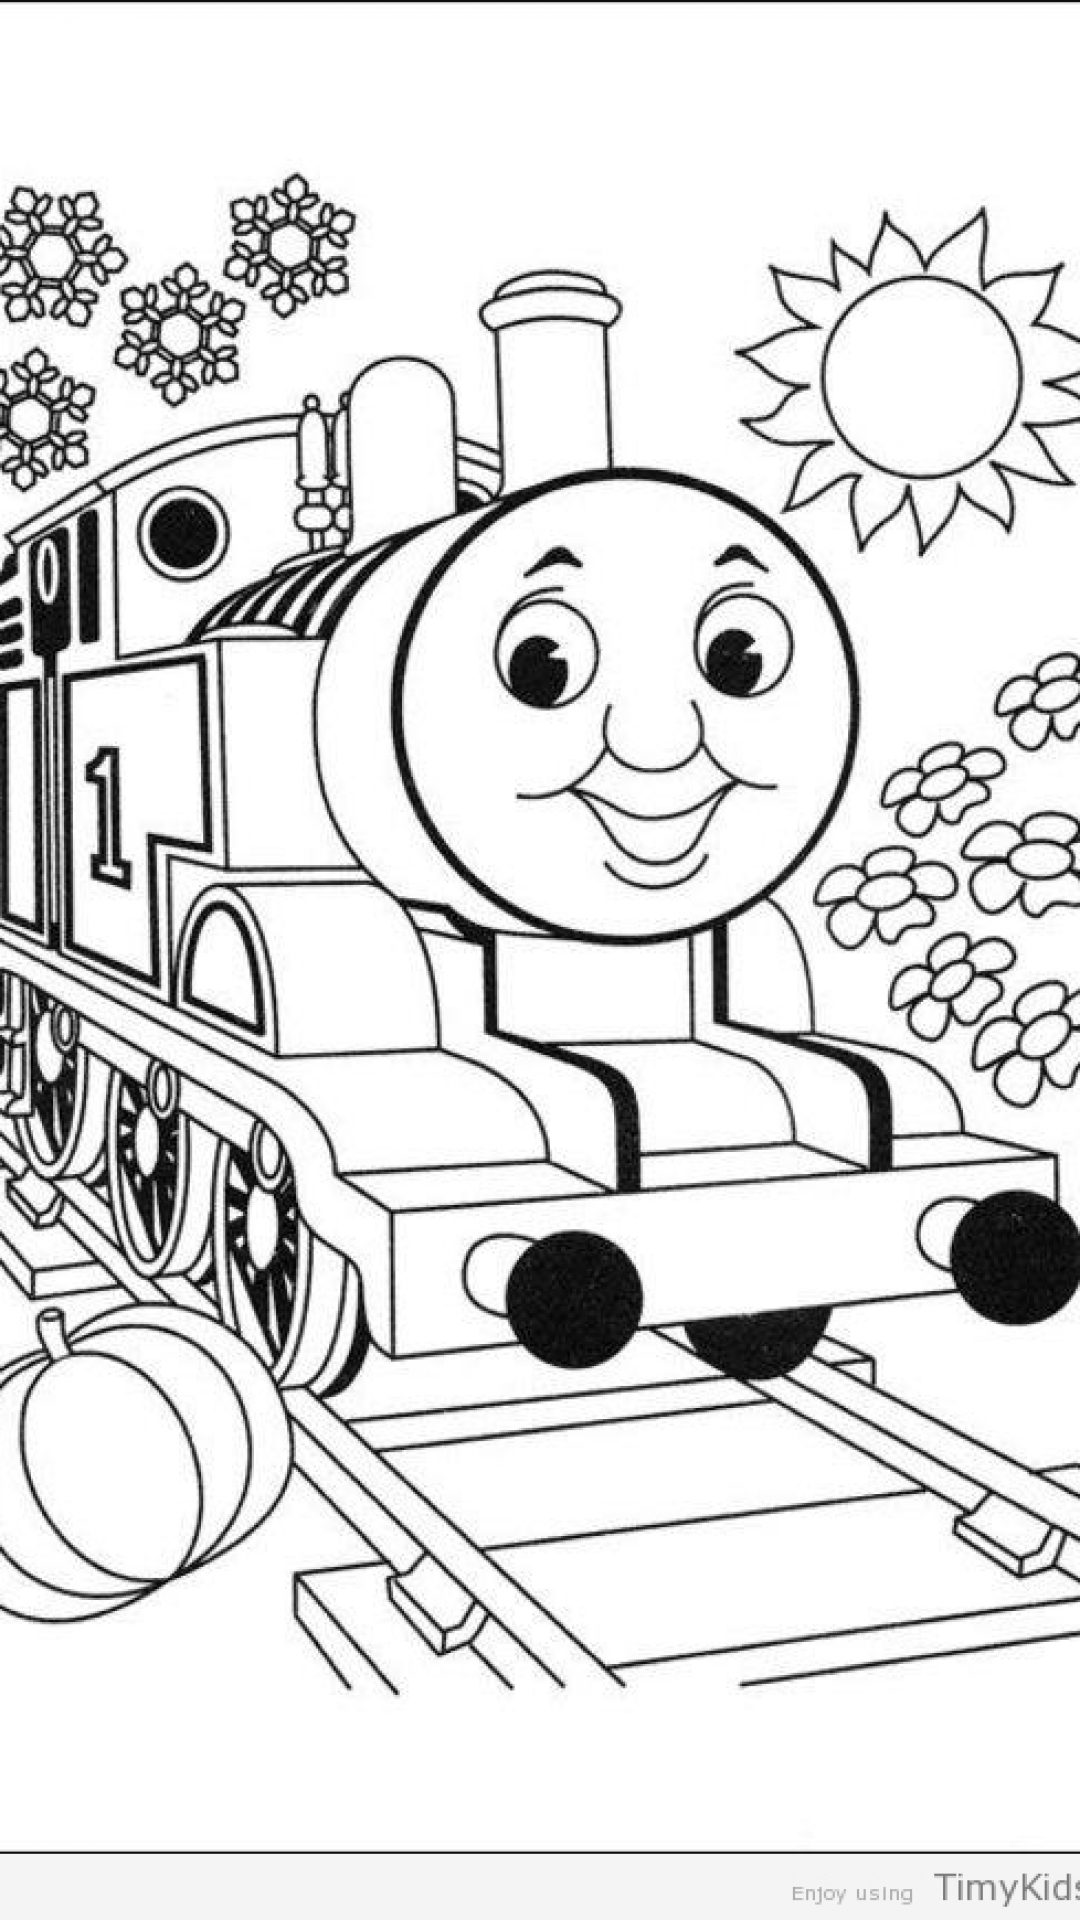 Train Coloring Pages Pdf at GetDrawings | Free download